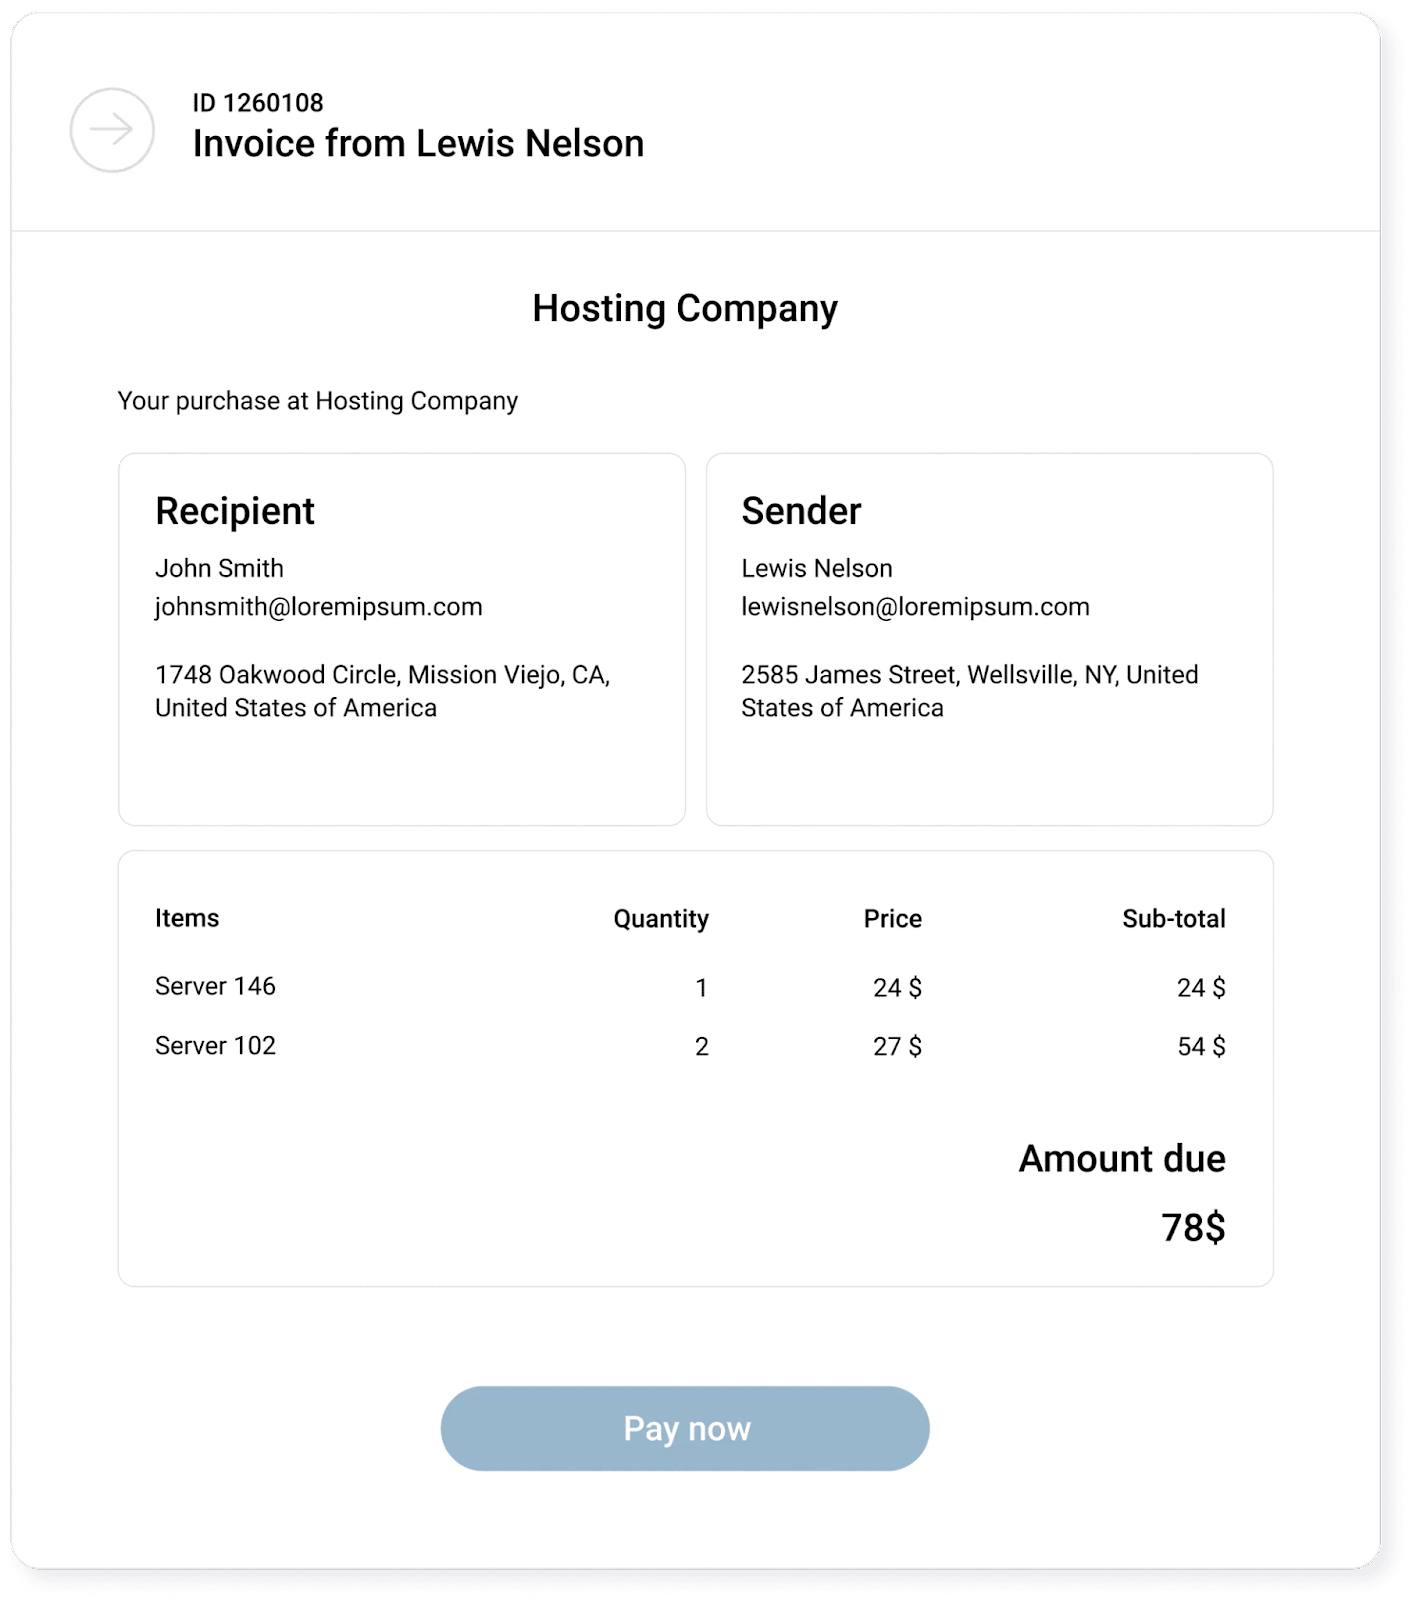 Sample Invoice from CoinGate.